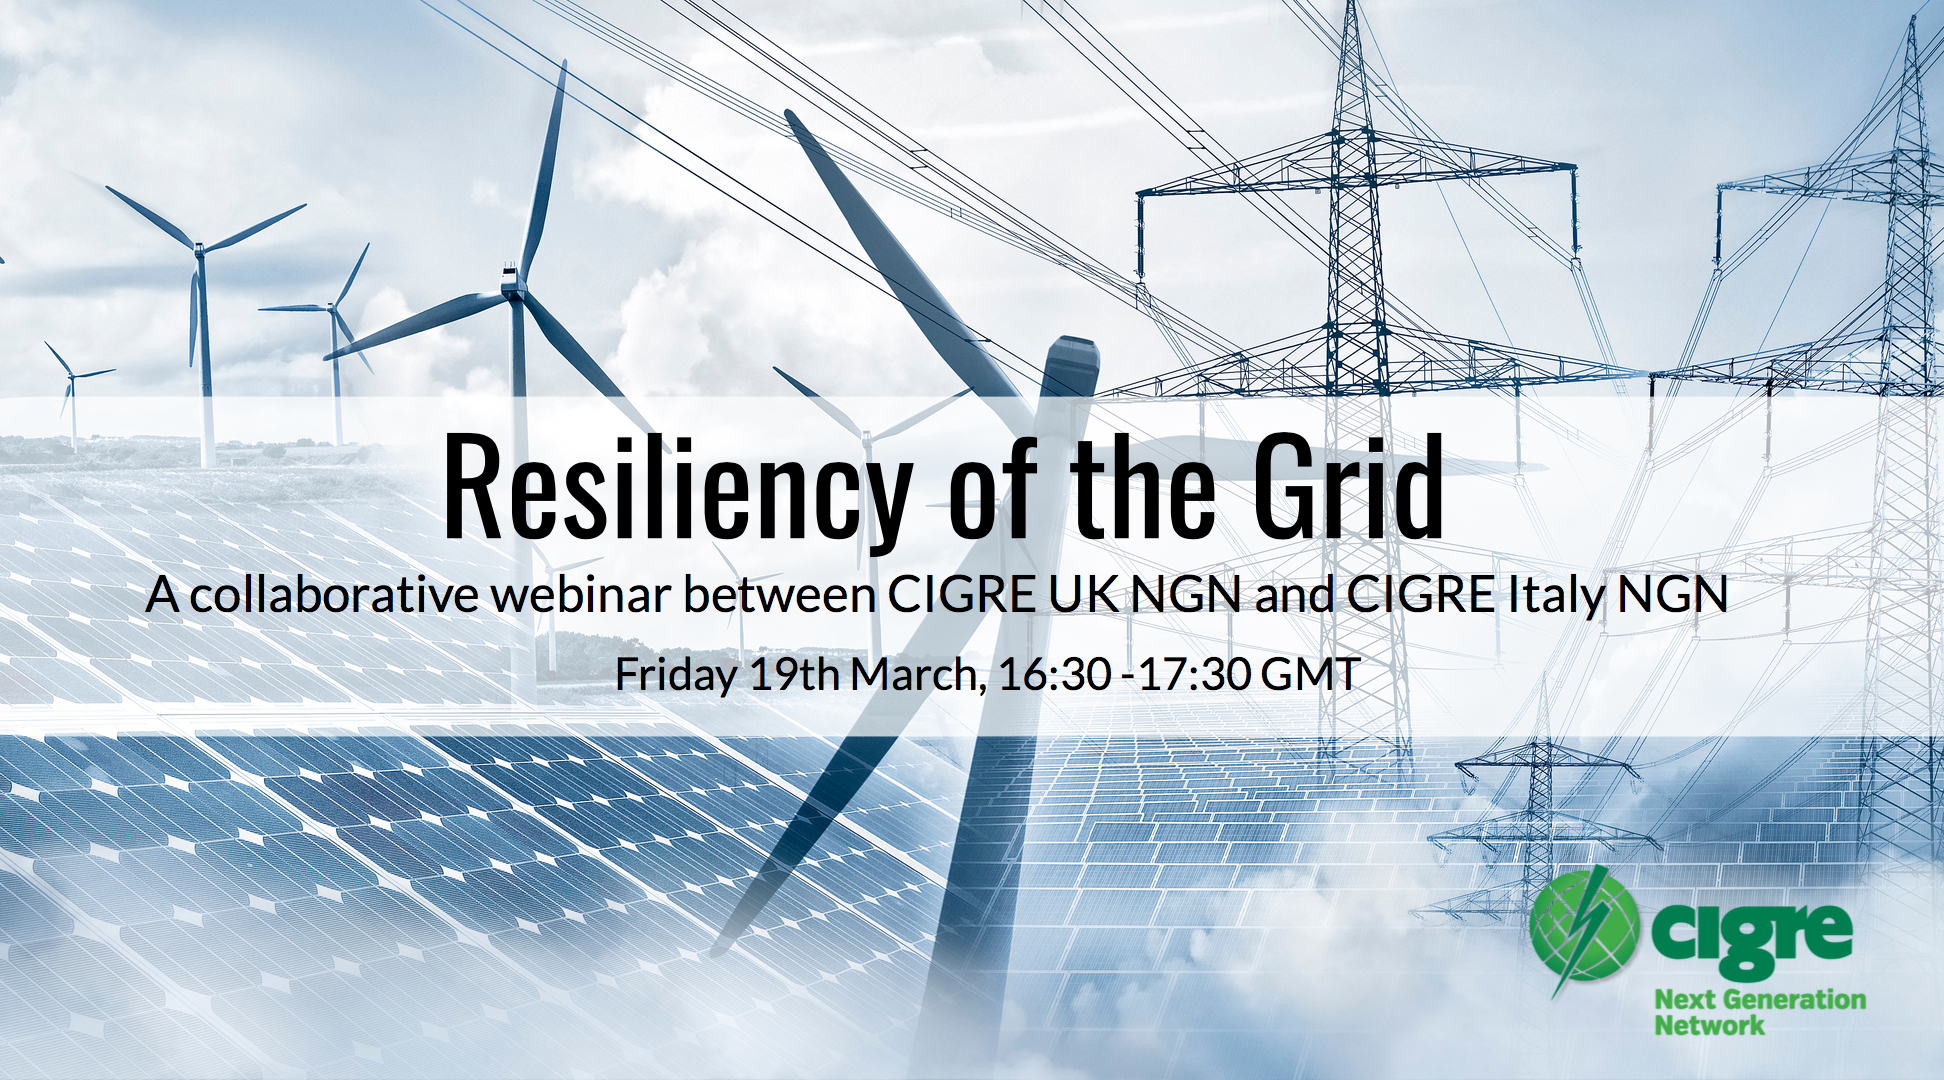 Resiliency of the Grid image - blog post